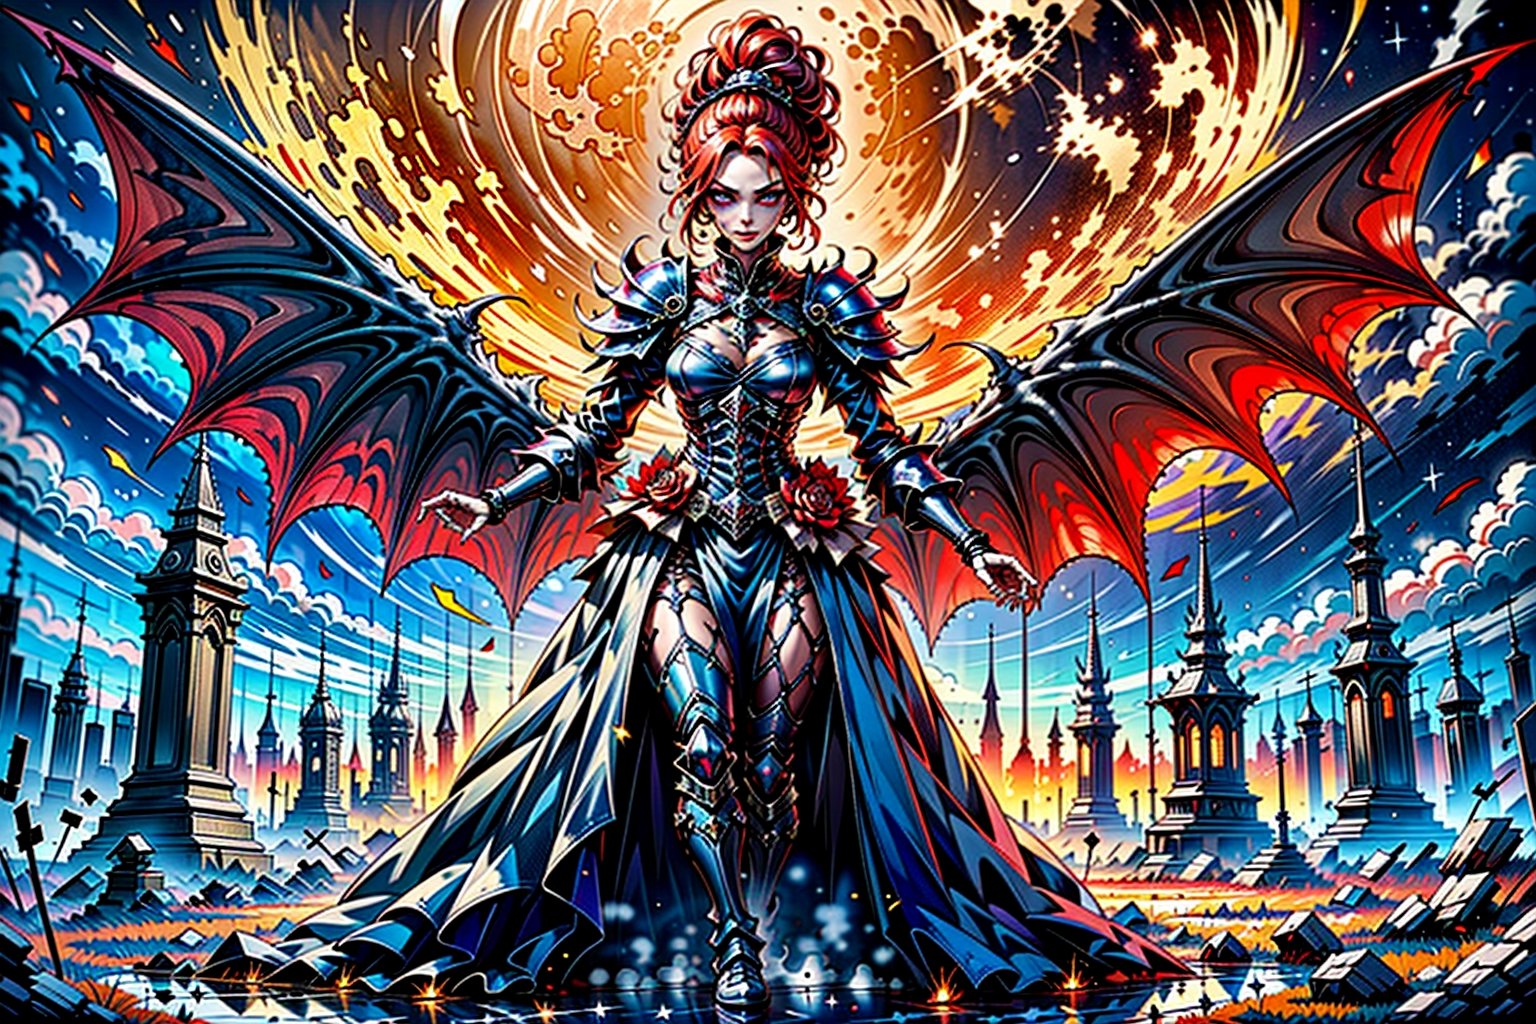 High definition vivid masterpiece, a beautiful vampire woman with red hair, elaborate braids, hair buns, messy hair, blowing hair, red glowing big detailed eyes, large tattered devil wings, realistic, steampunk, night time, in front of a gothic castle, gravestones, full moon, starry sky, dreamy, fantasy, mythical, magical, steampunk mechanical glowing full moon, light shafts, detailed background, boots, full body,horror